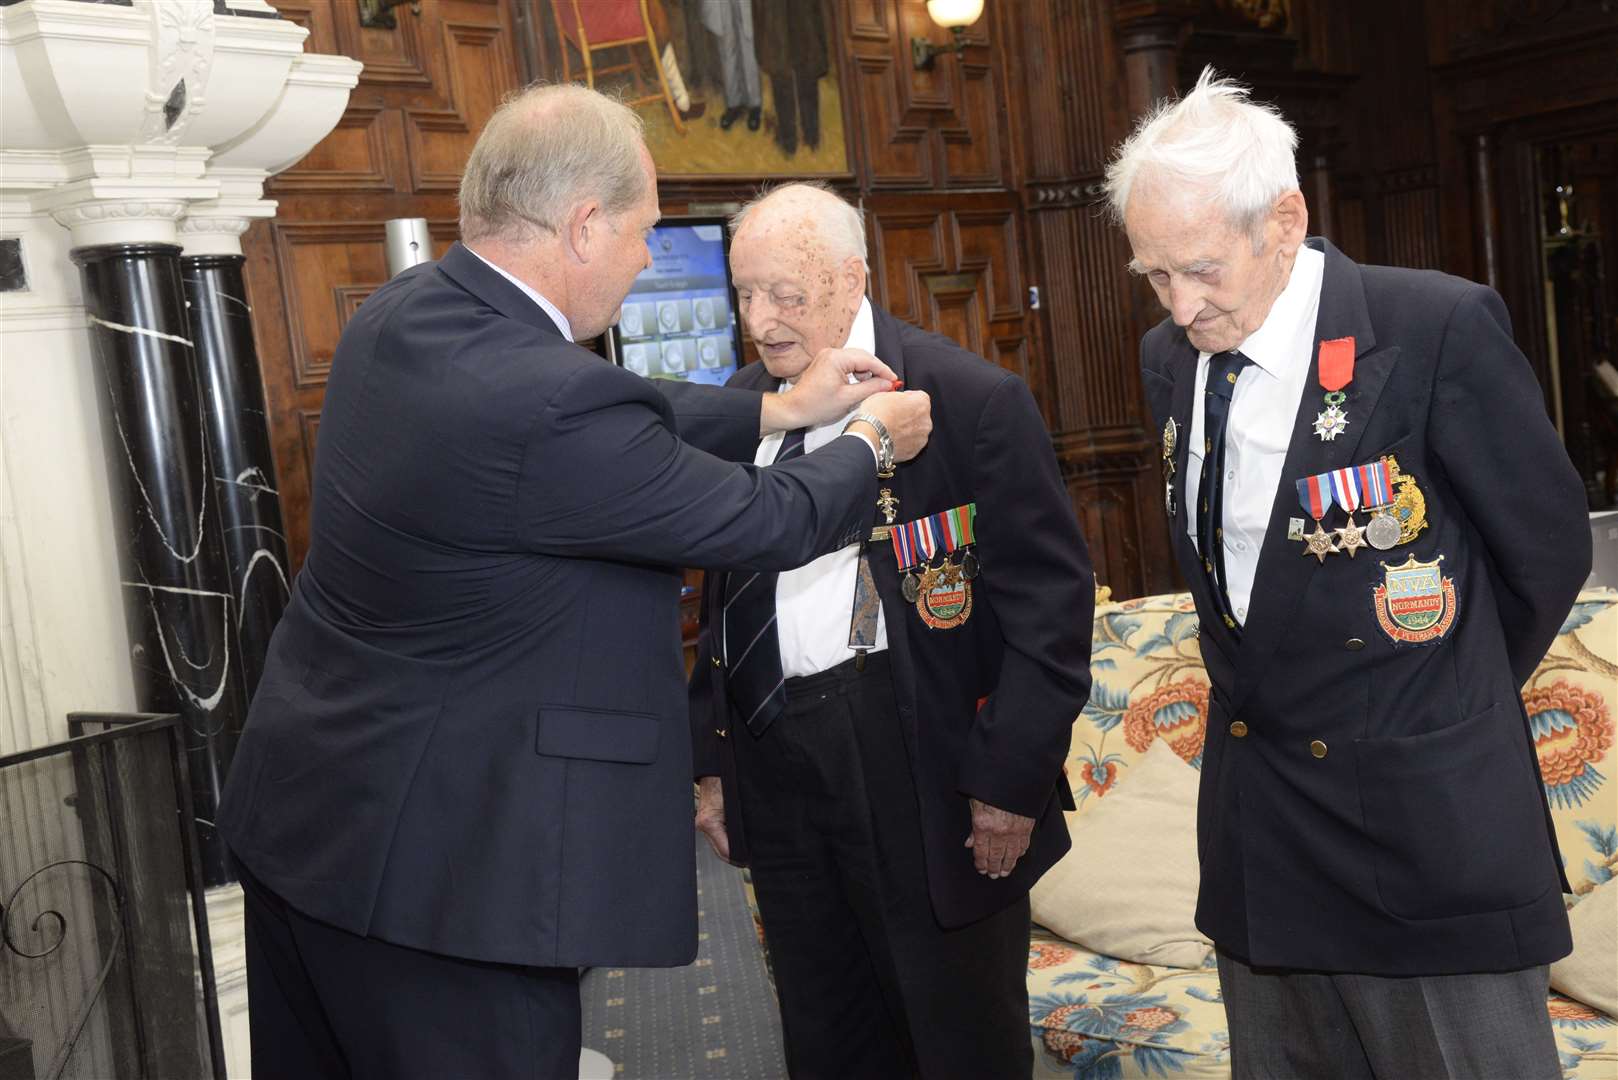 Honorary French Consul James Ryeland presenting medals to D-Day veterans Frank Suttie and Frank Gibbins at the Legion D'Honneur presentation in 2016